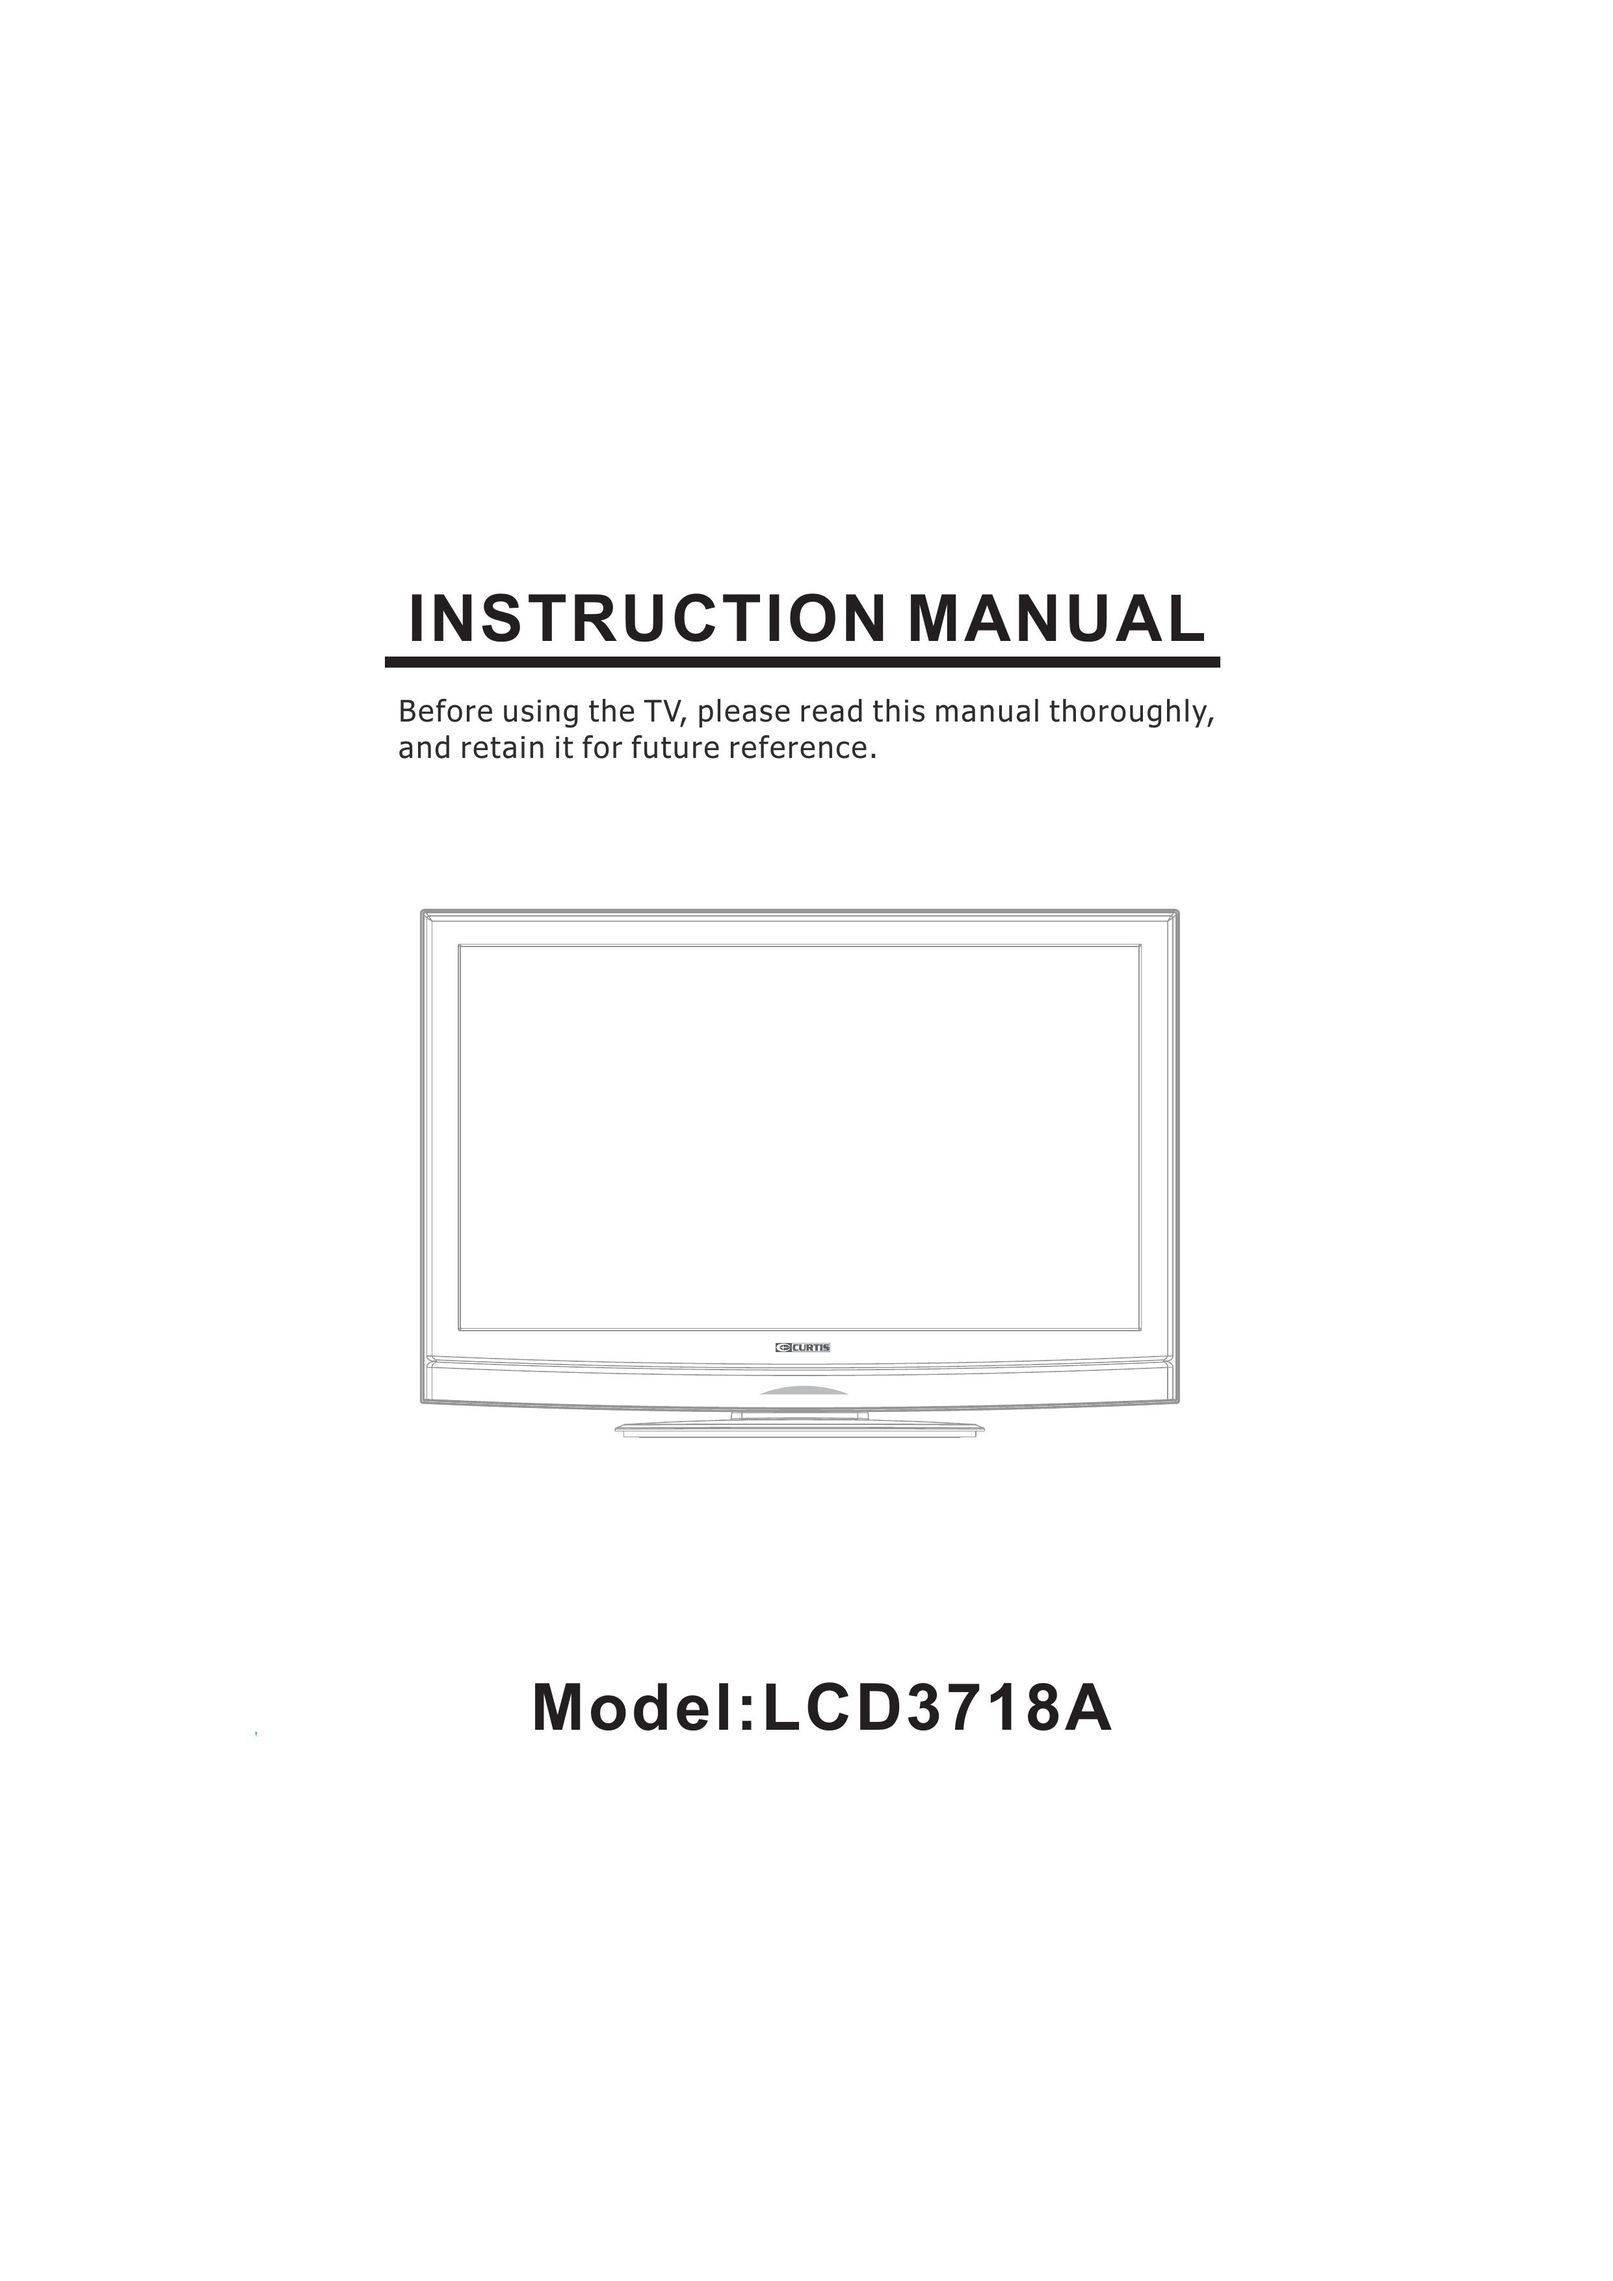 Curtis LCD3718A Flat Panel Television User Manual